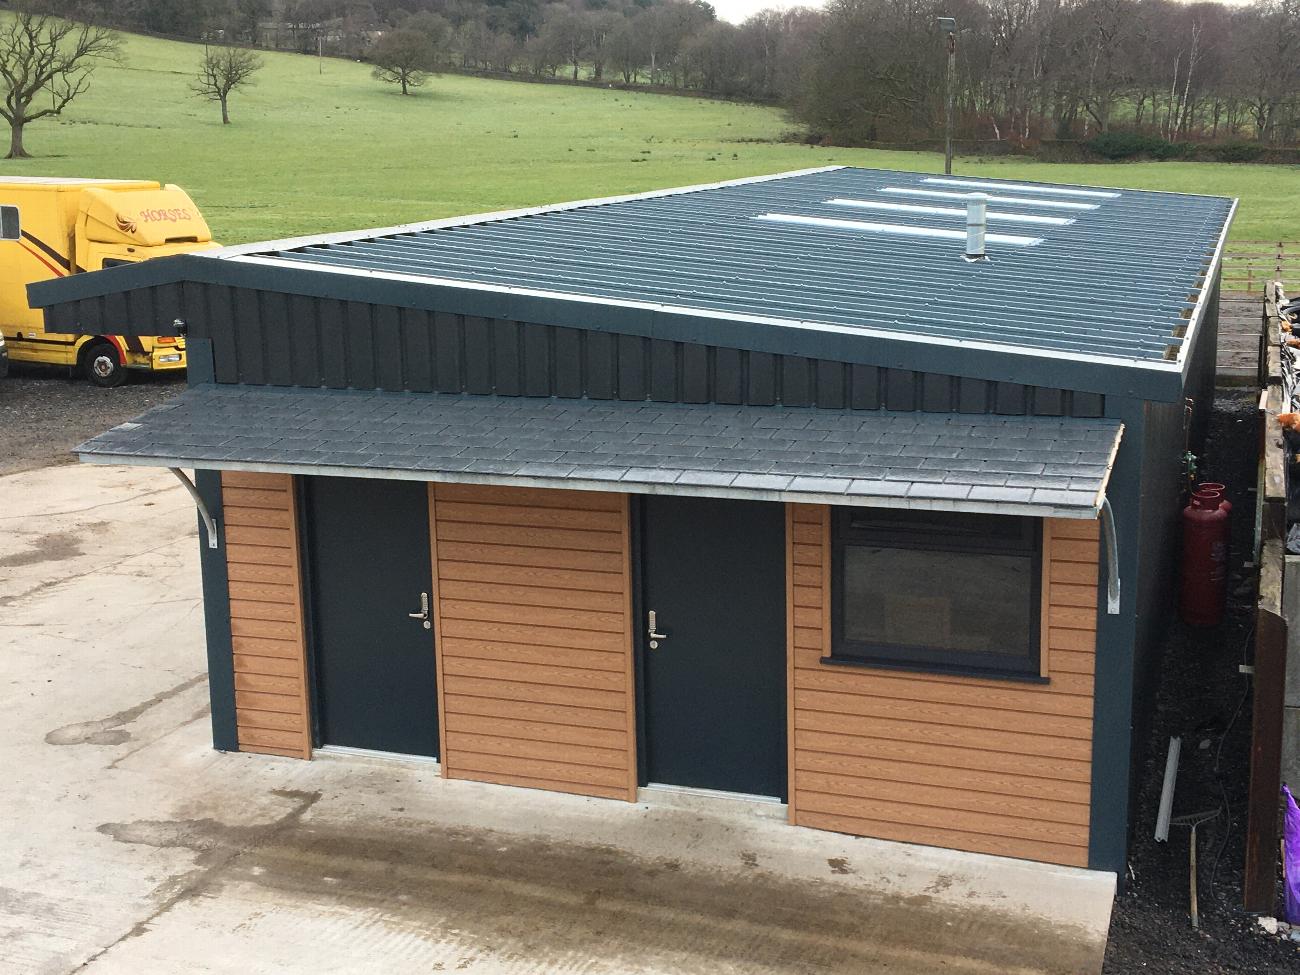 Arenas & Buildings | equestrian stables, field shelters, equine accessories, arena and menage company in Blackburn and Lancashire gallery image 13